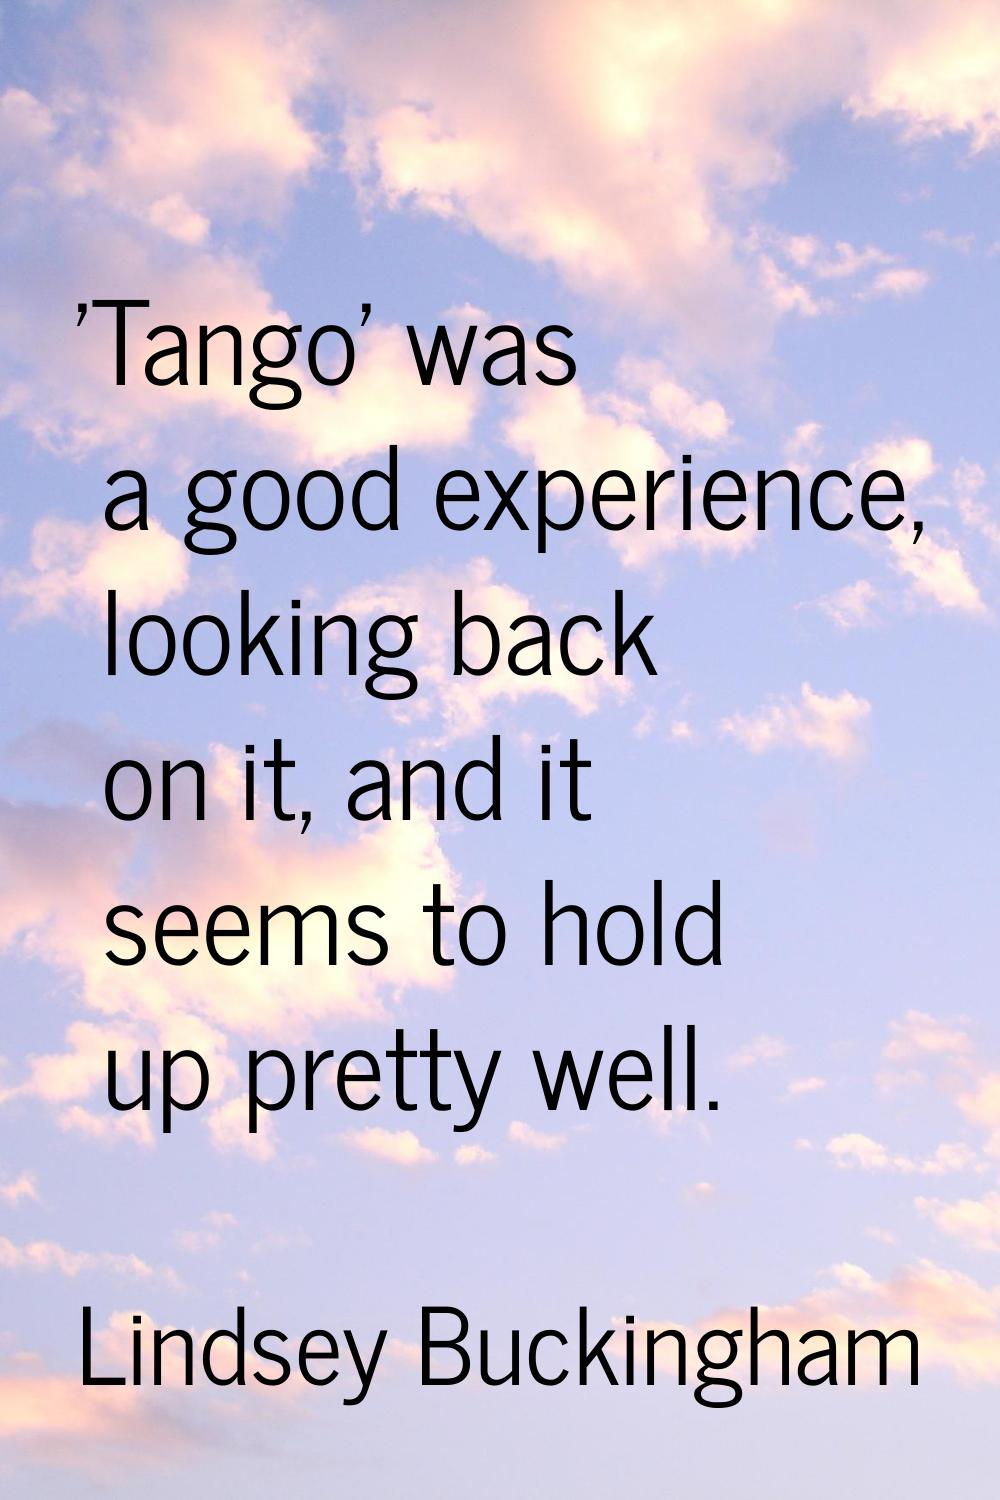 'Tango' was a good experience, looking back on it, and it seems to hold up pretty well.